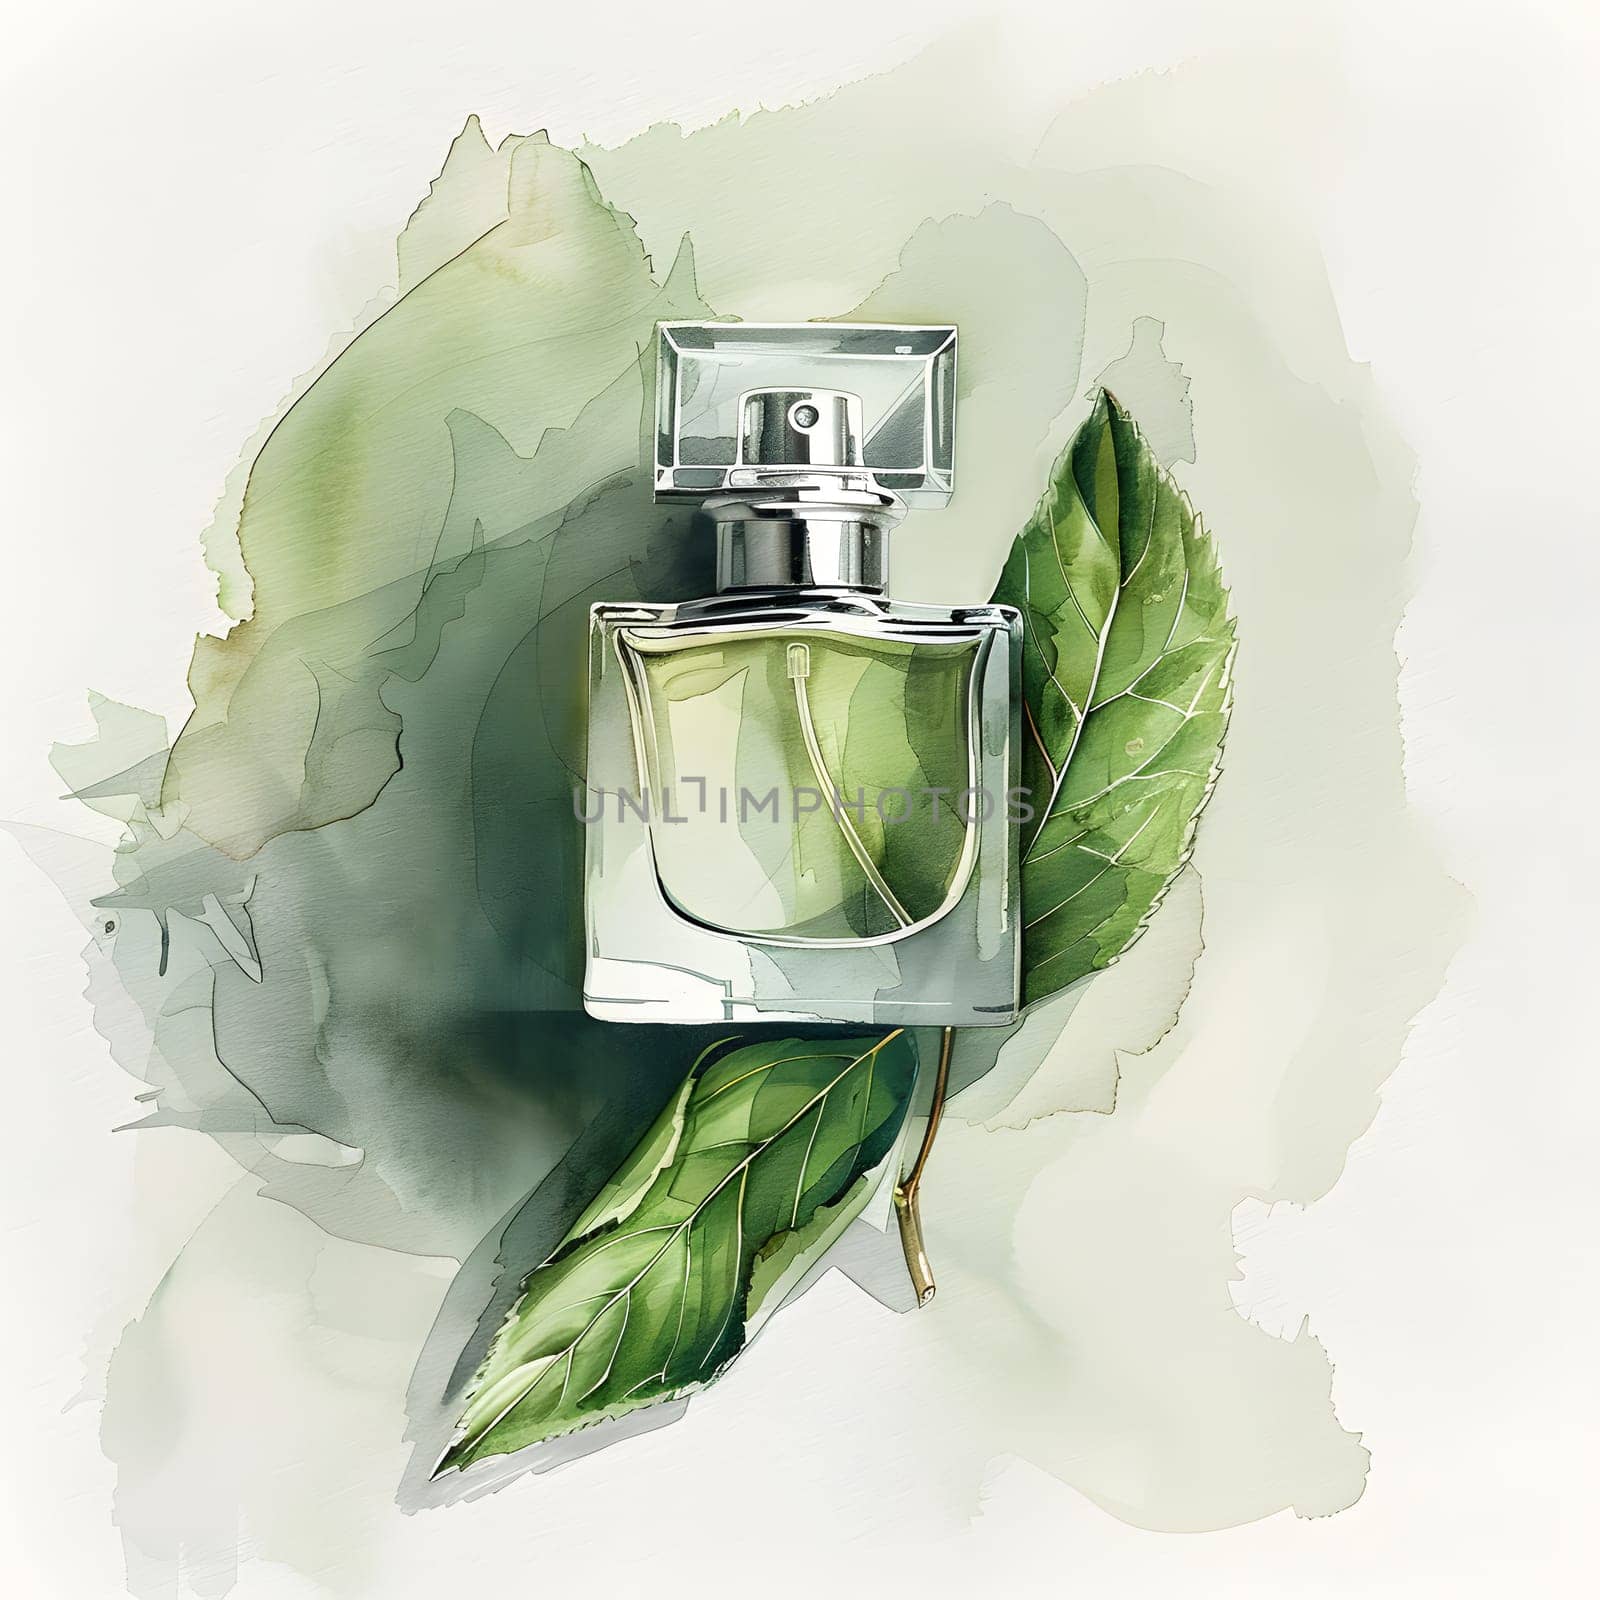 A bottle of perfume with green leaves illustrated on a watercolor background, showcasing the fluid nature of the fragrance within the transparent glass container